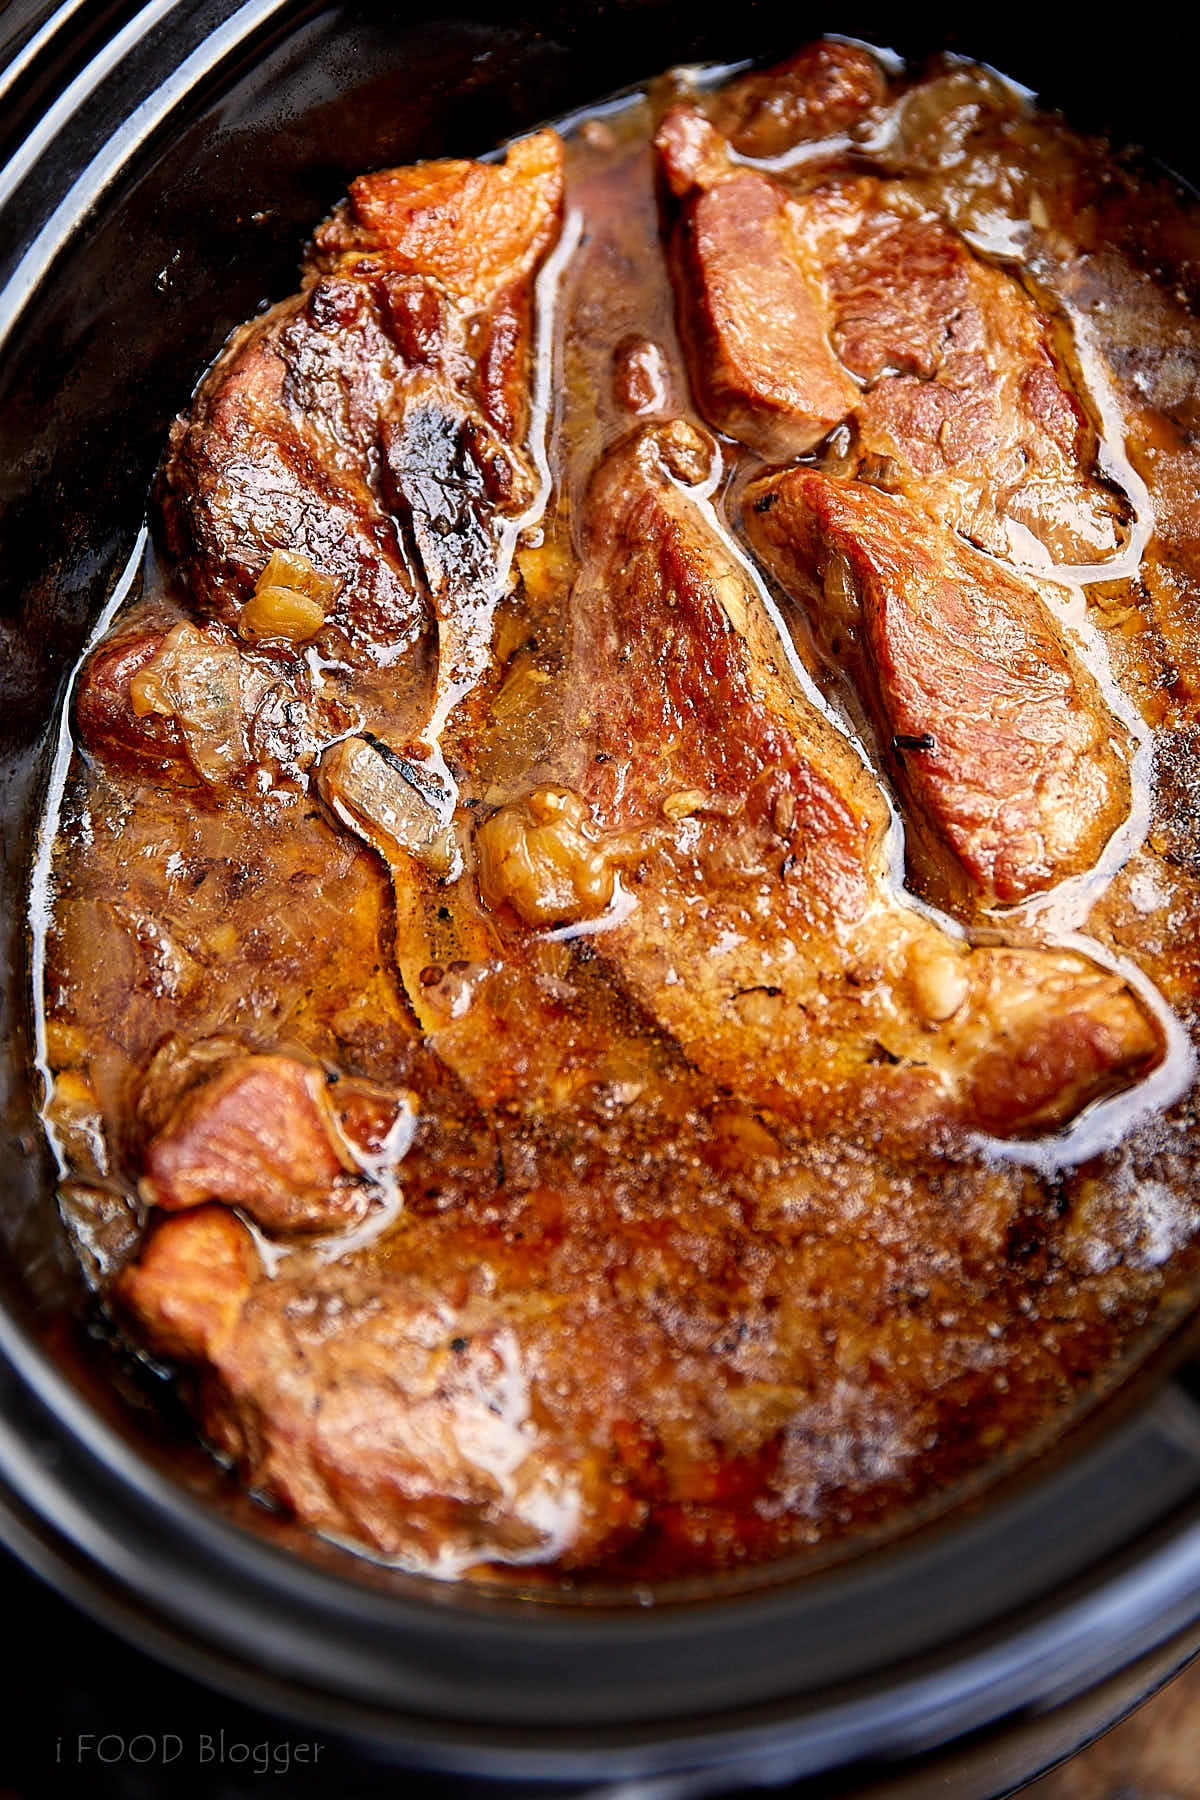 Country style pork ribs, moist and juicy, inside a black slow cooker with amber juices at the bottom, view at an angle.